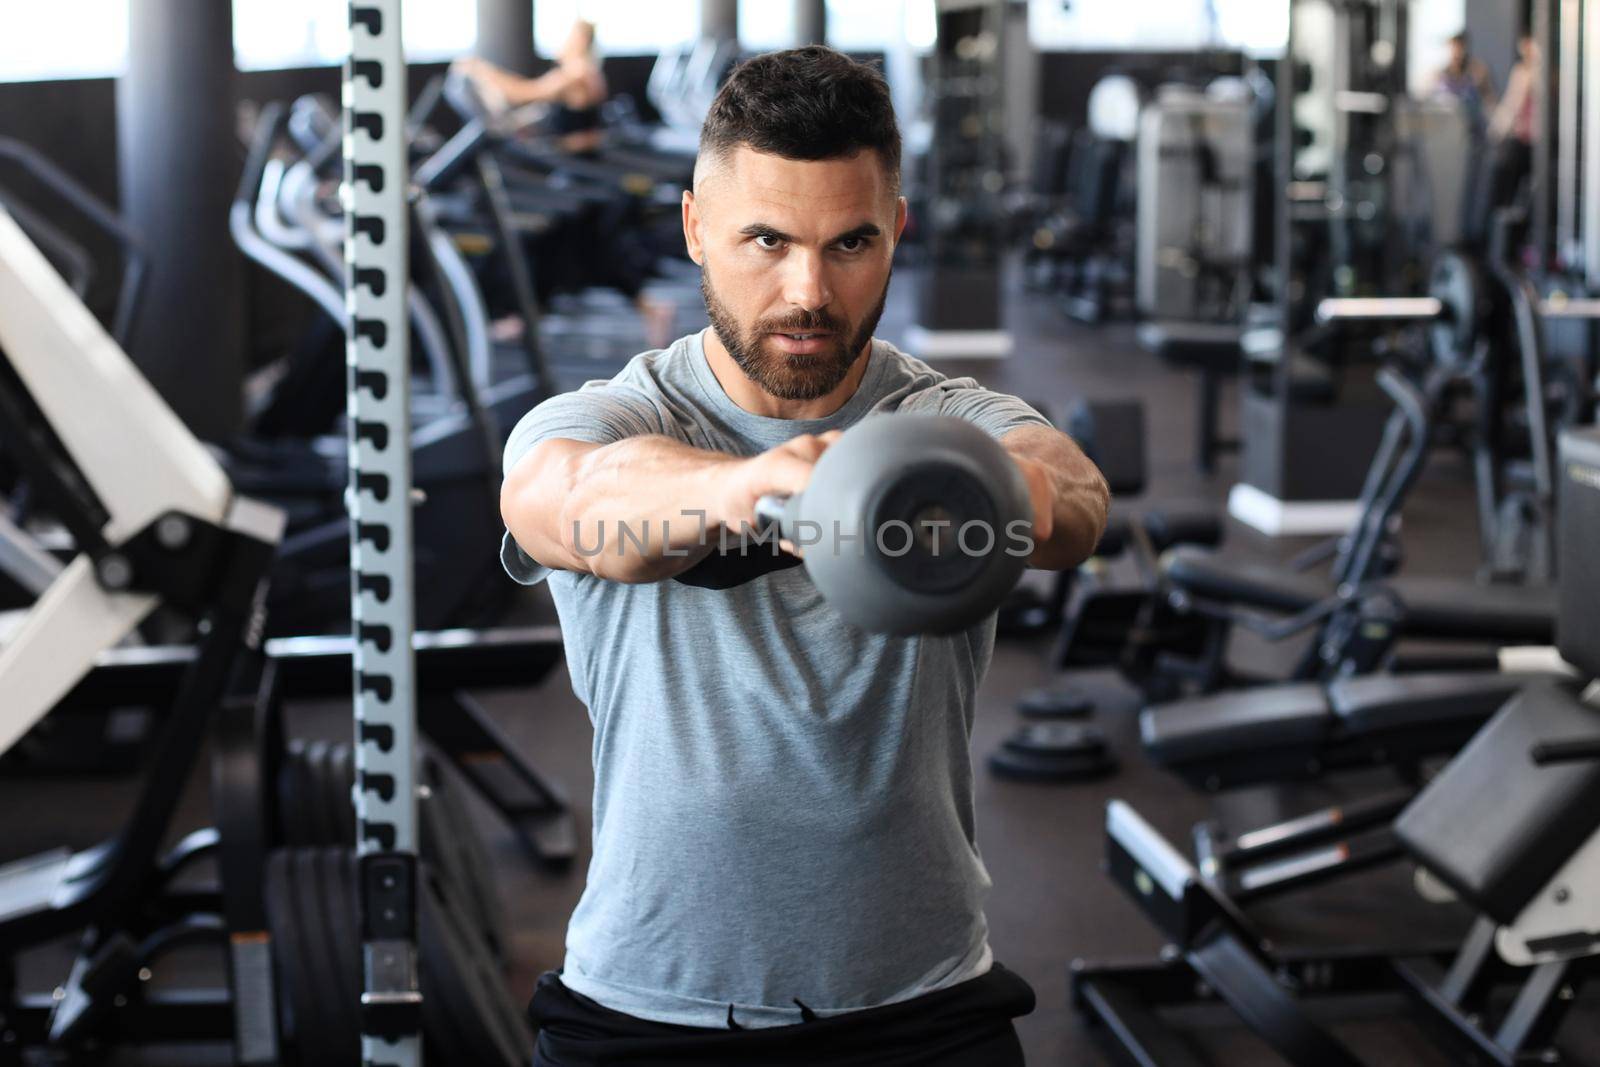 Fit and muscular indian man focused on lifting a dumbbell during an exercise class in a gym